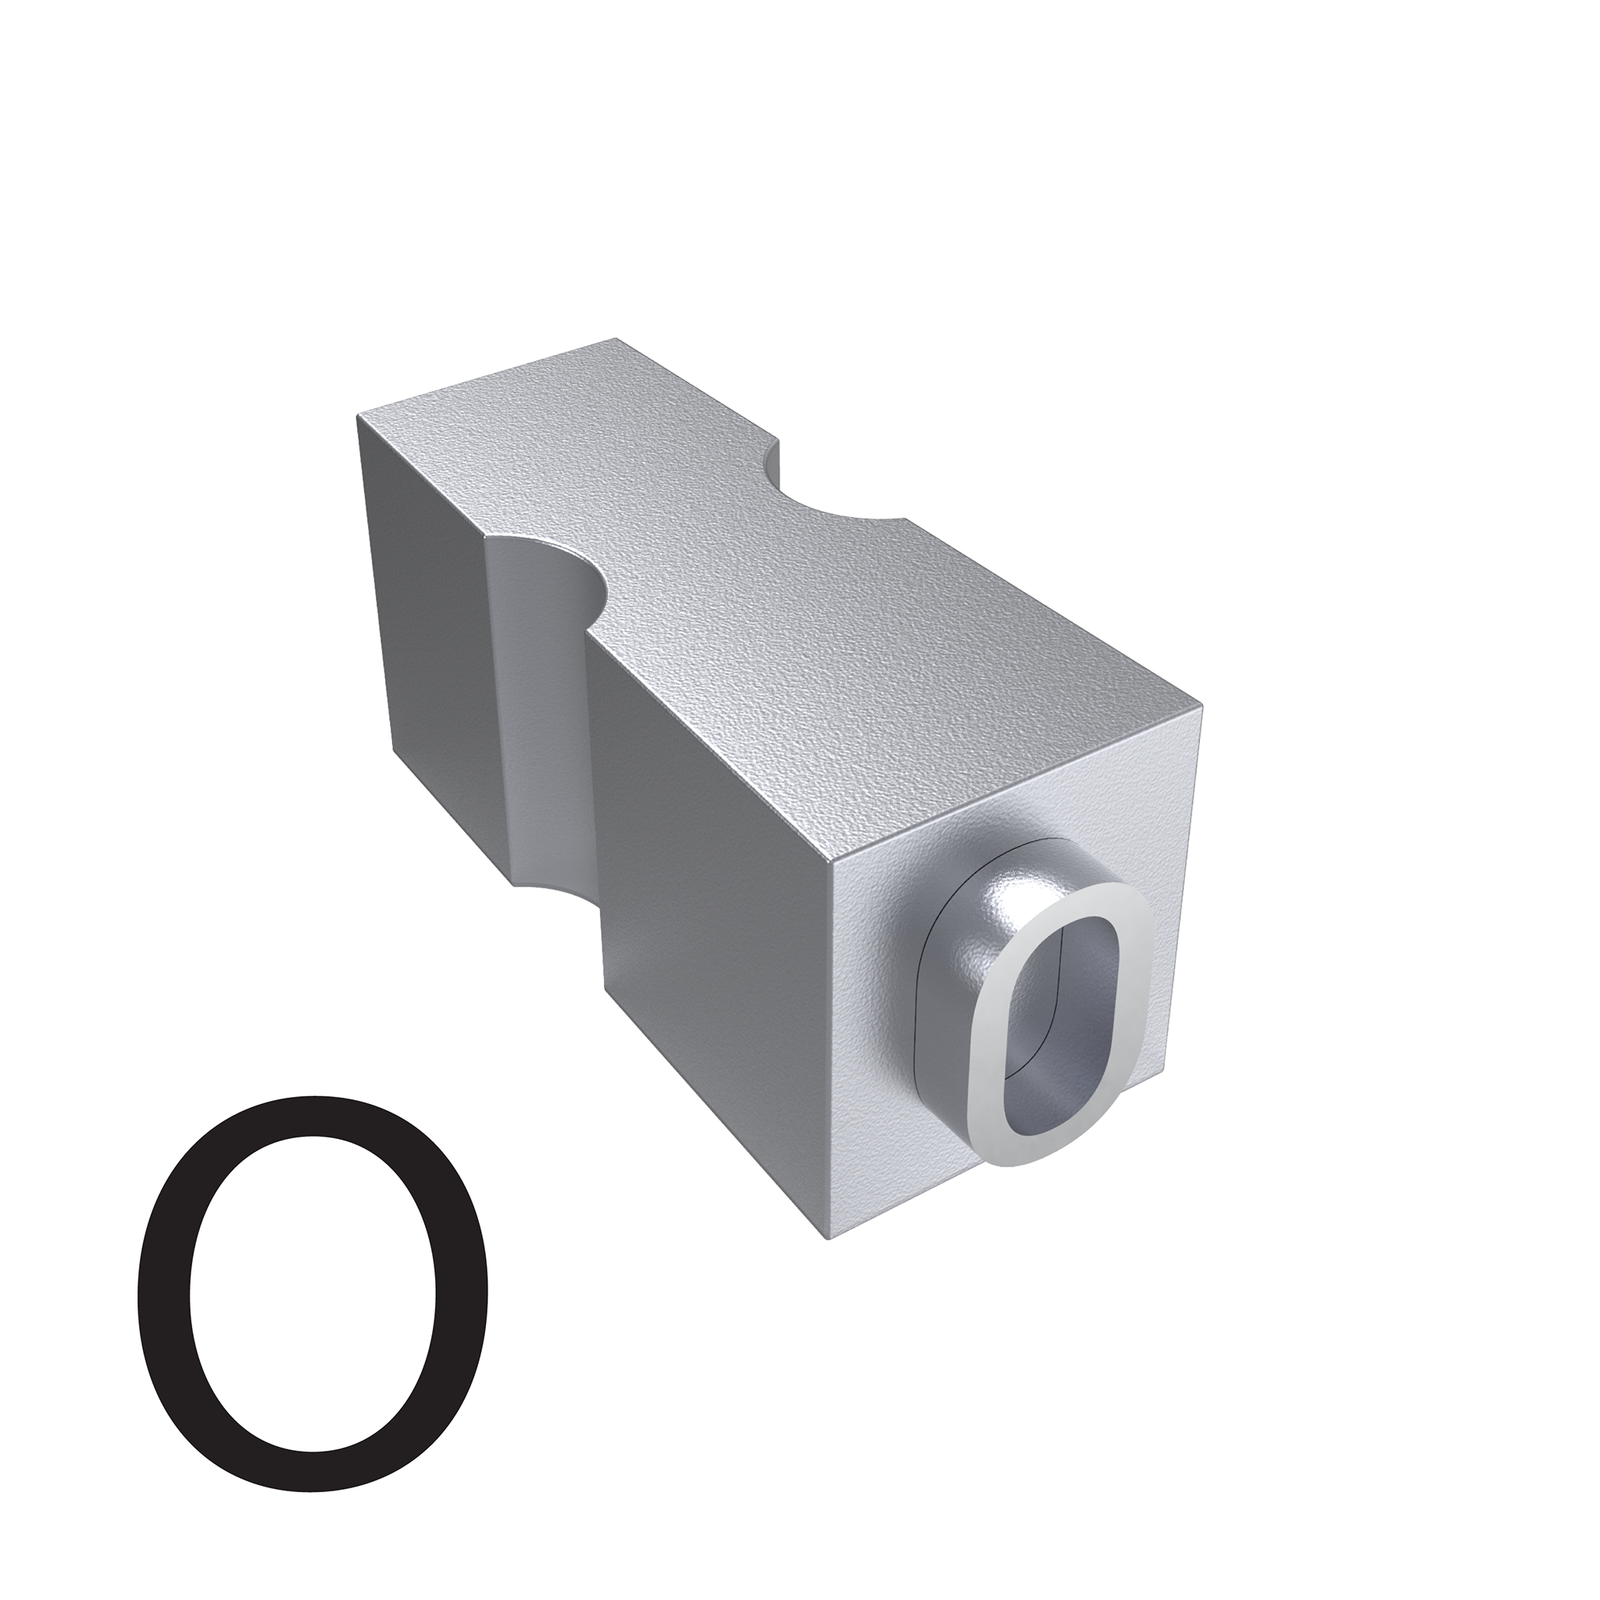 Type of letter O for hot ink roll printers